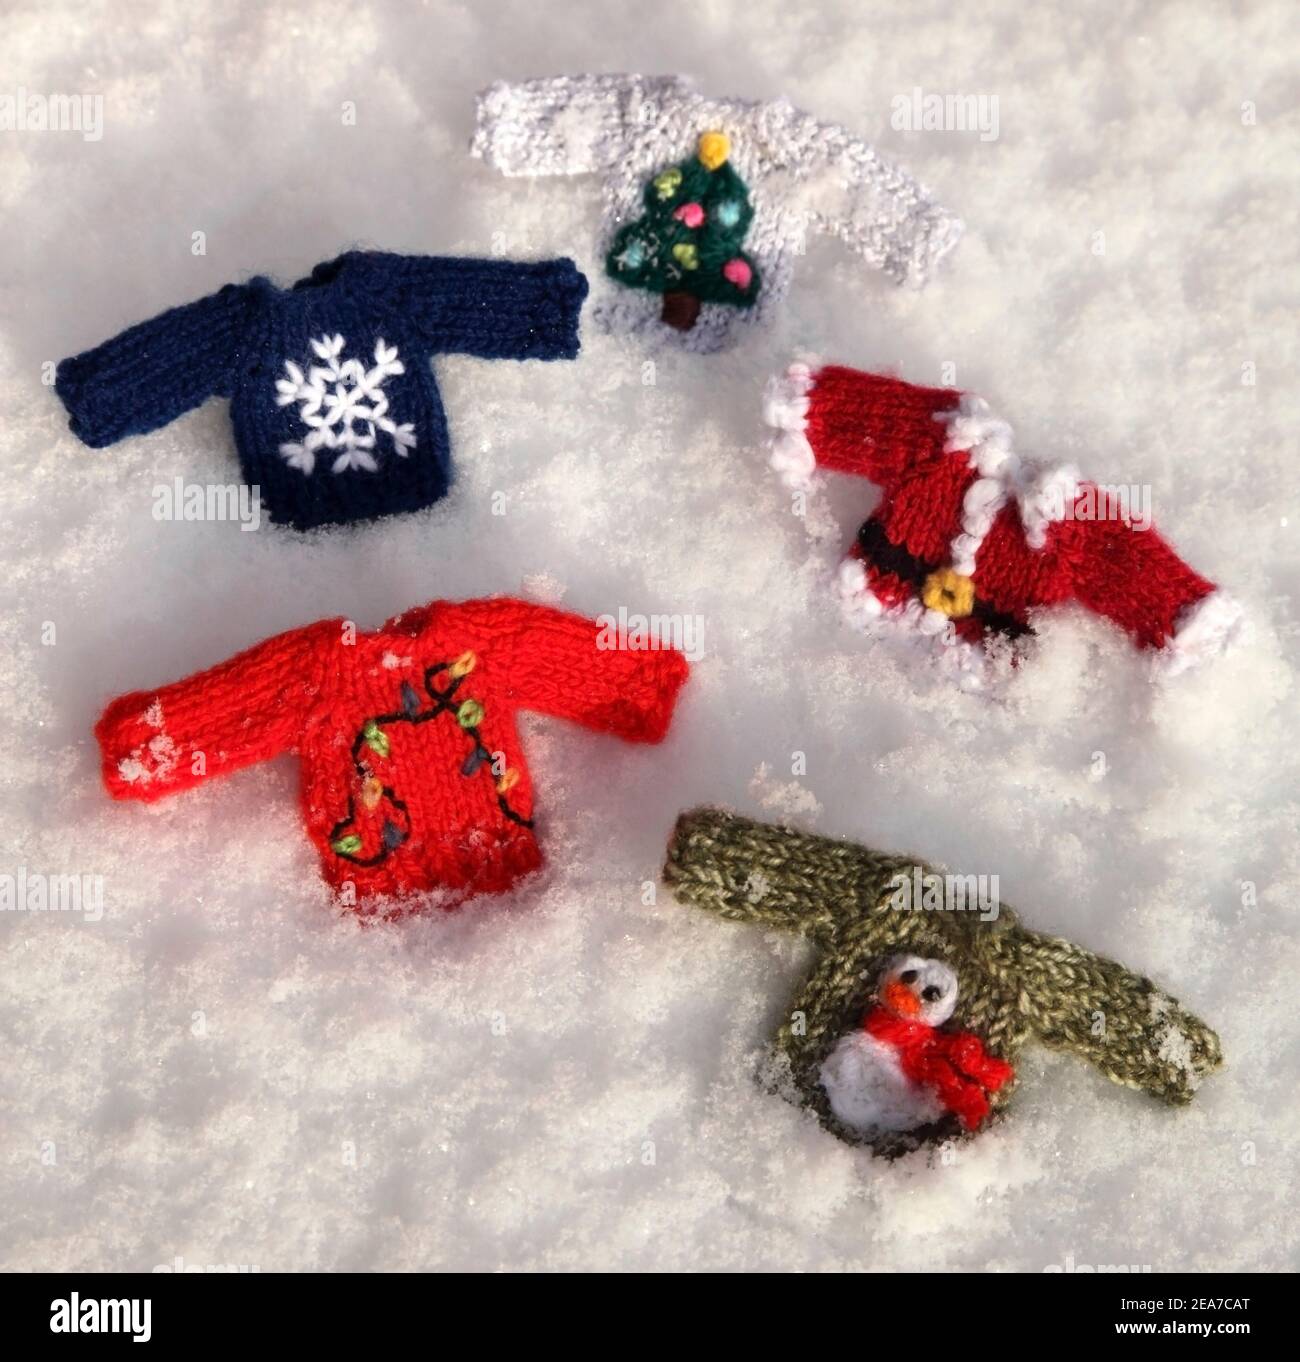 Selection of small knitted festive Christmas jumpers in the snow. Stock Photo